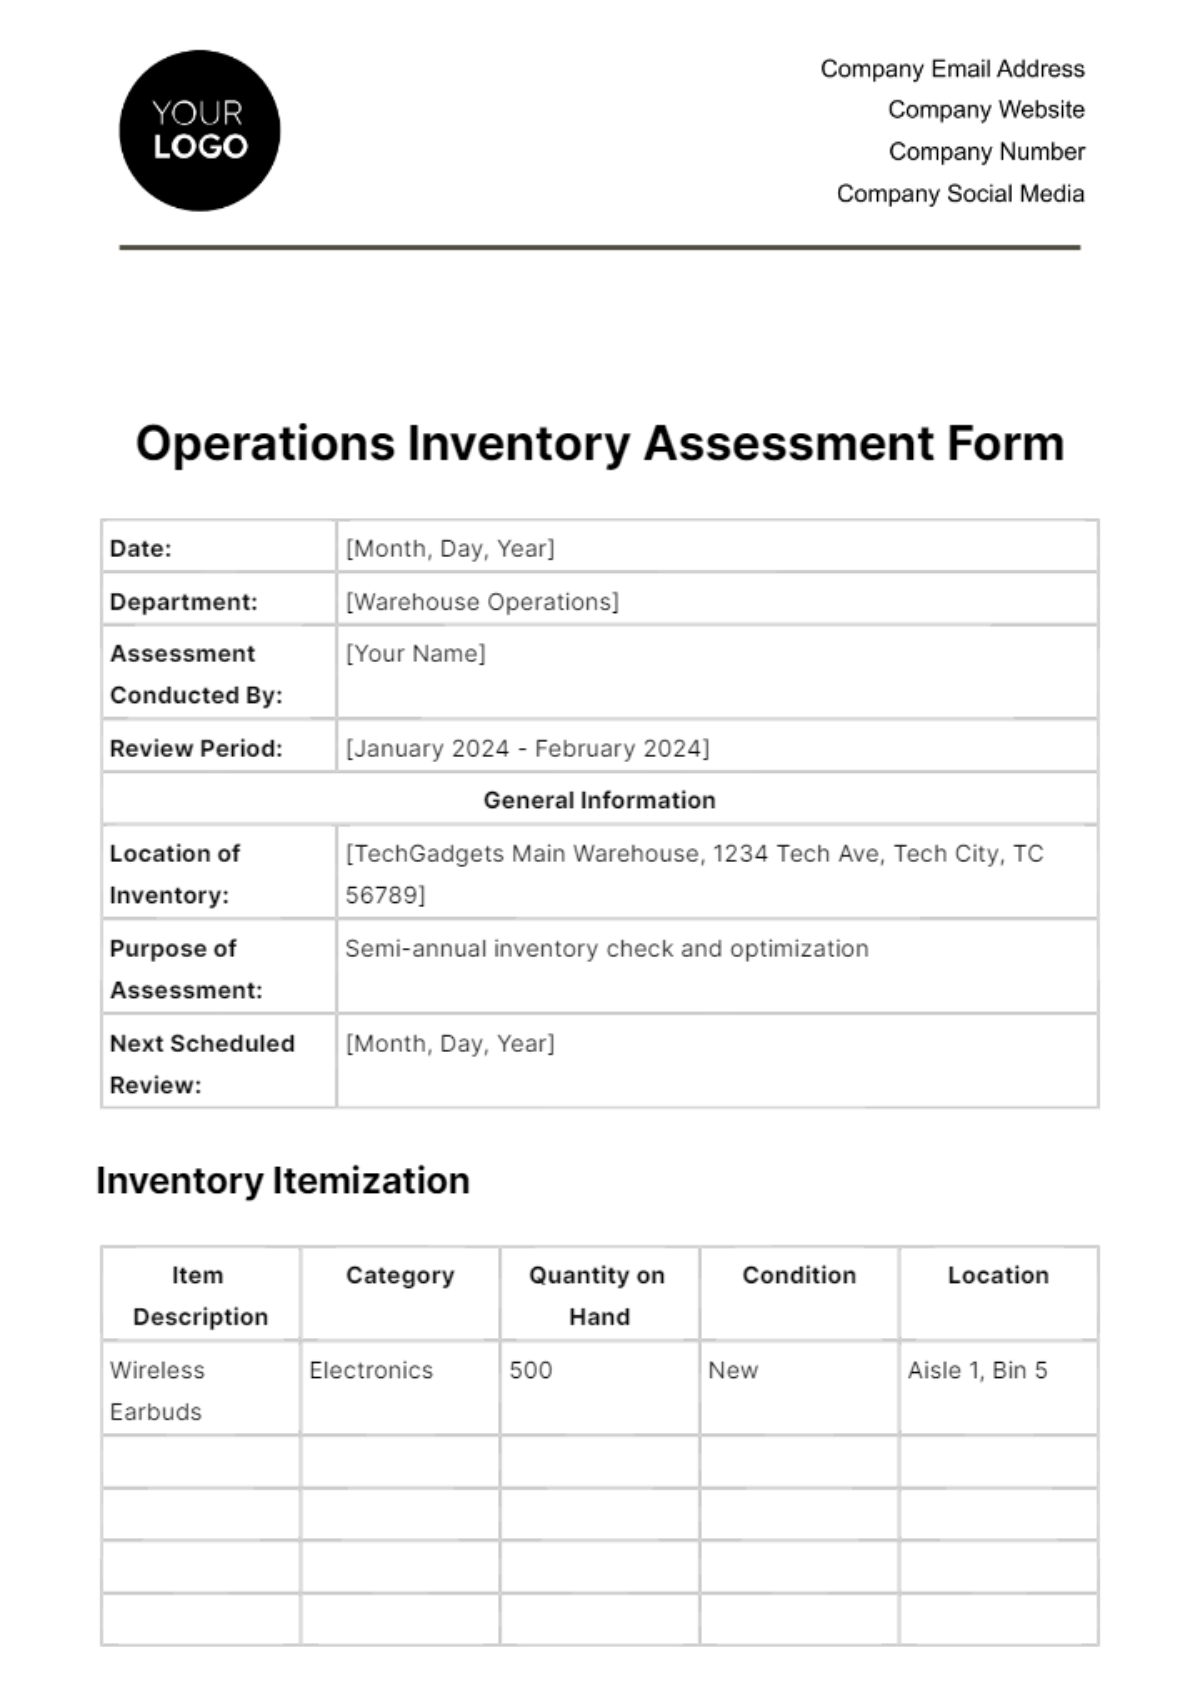 Operations Inventory Assessment Form Template